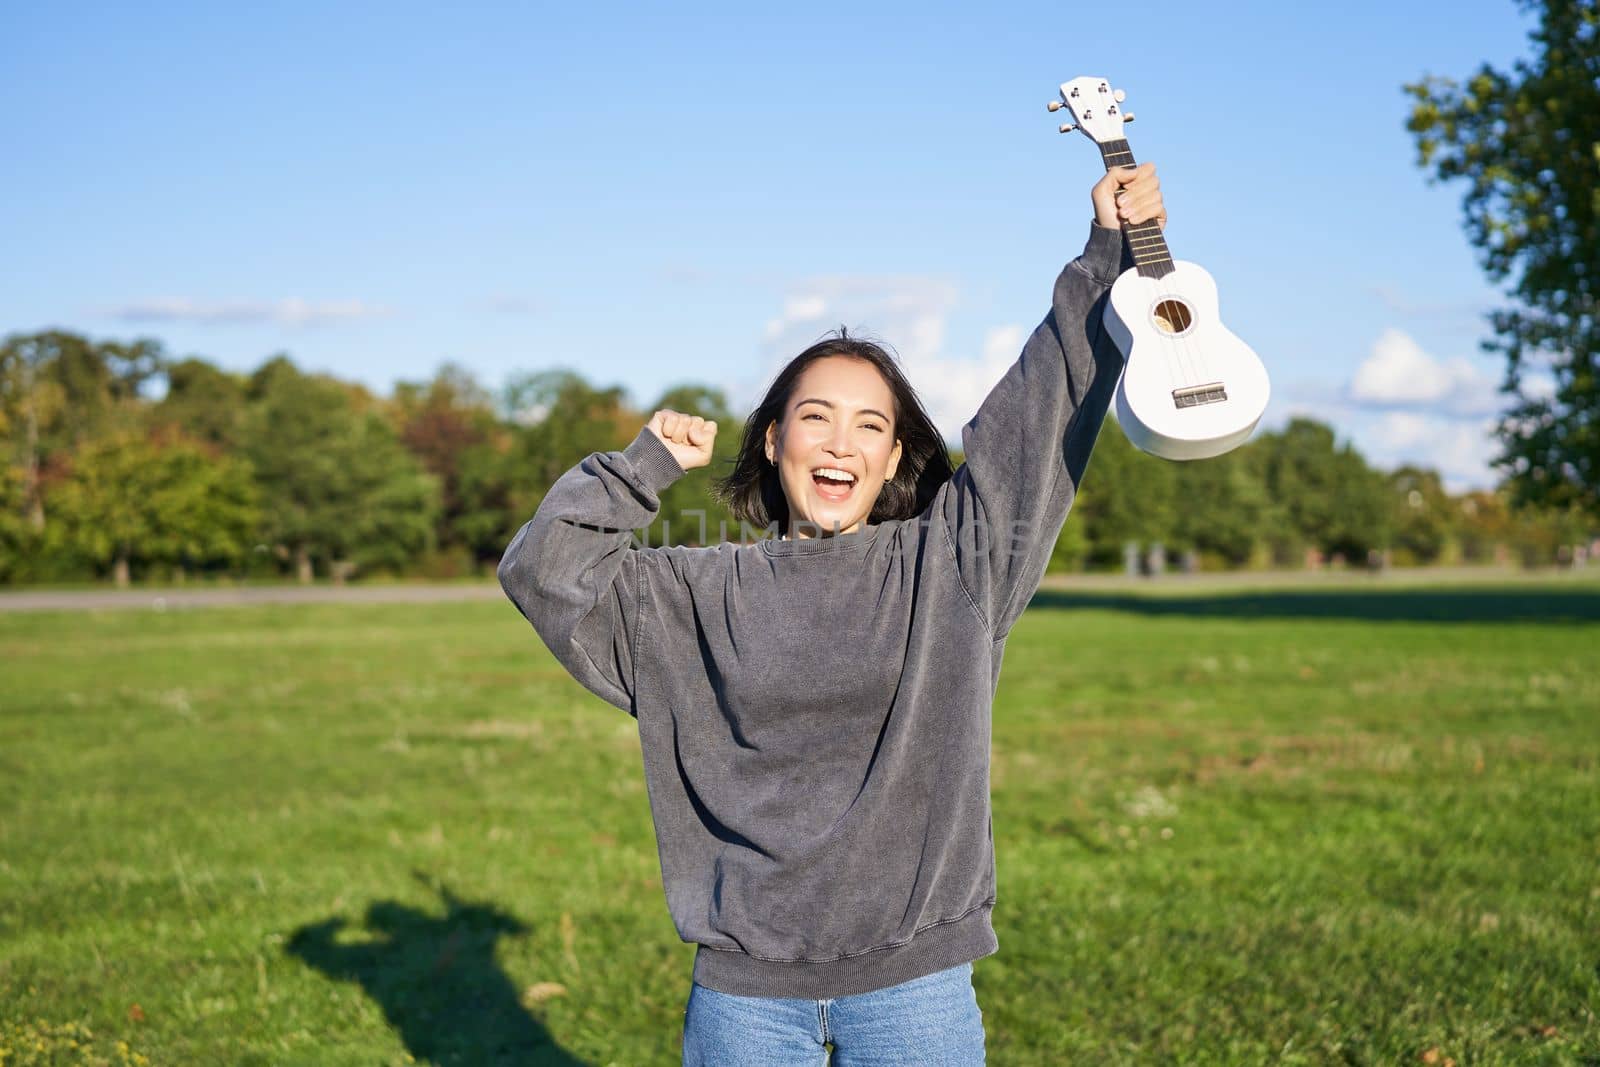 Positive beauty girl with ukulele, dancing and feeling freedom, looking excited, triumphing and celebrating.